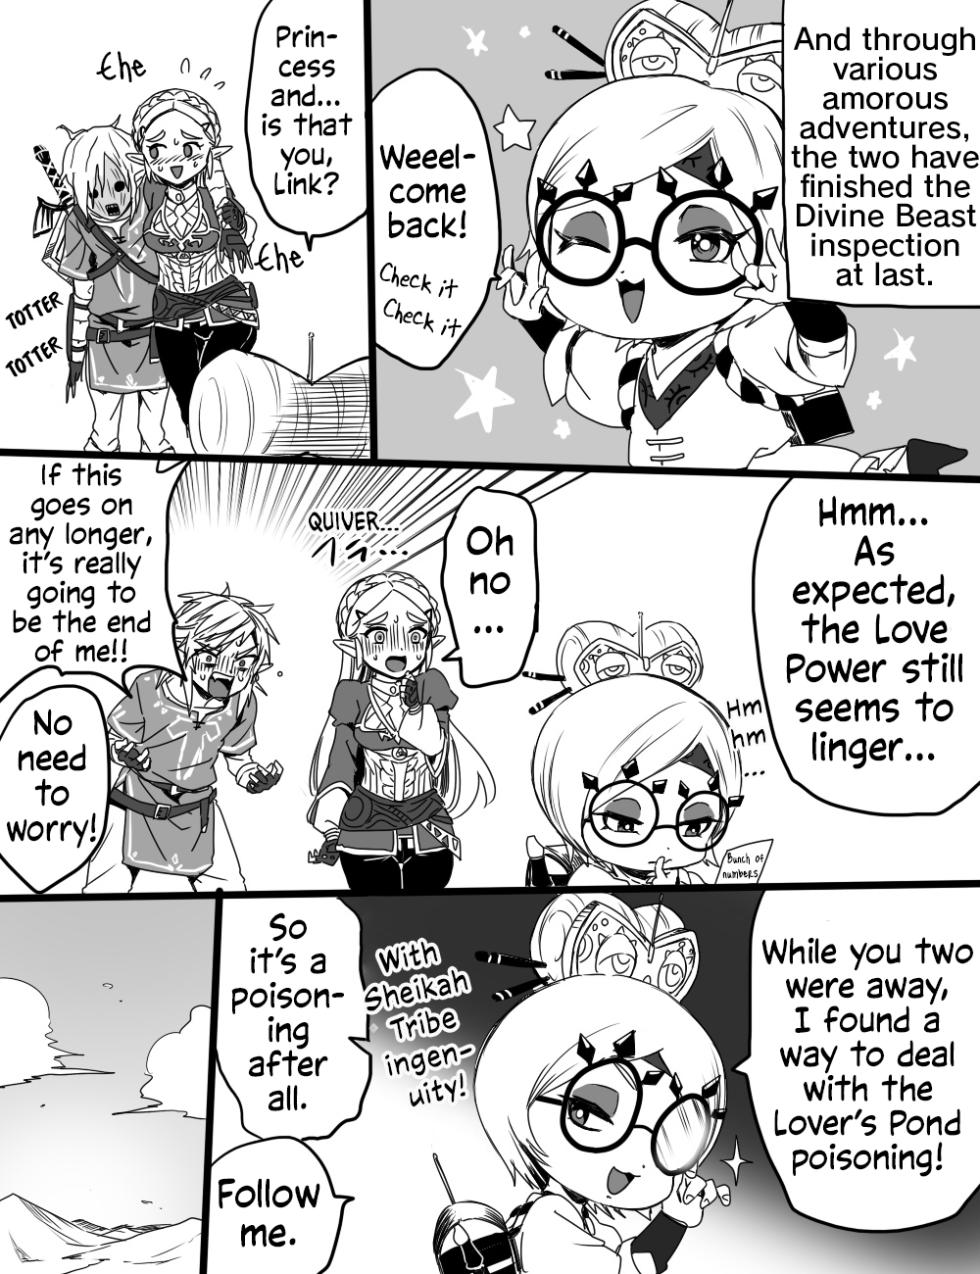 [Wasabi] Love Pond Power 2 | The Power of the Lover's Pond 2 (The Legend of Zelda) [English] [Solas] - Page 11